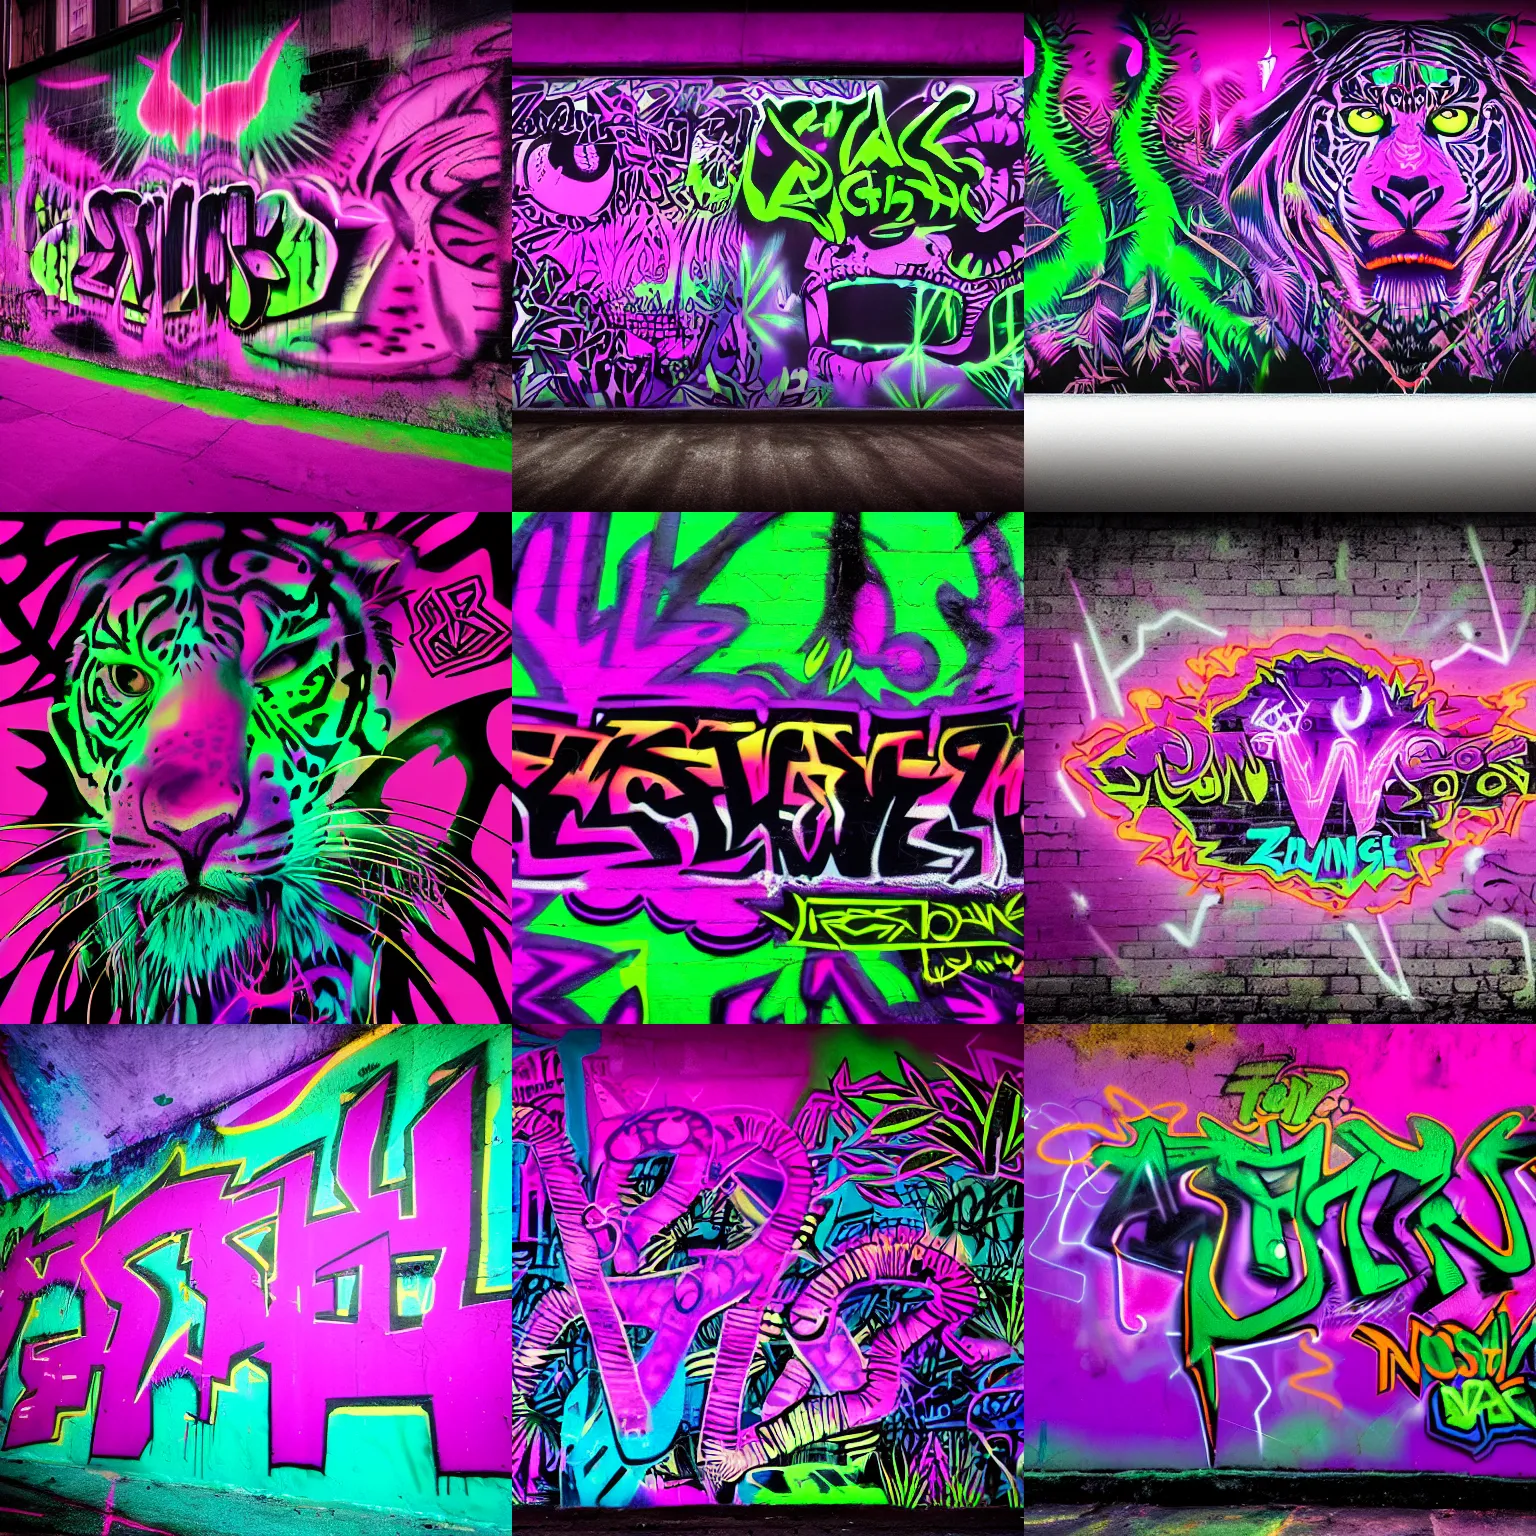 Prompt: Mystic jungle - psychedelic graffiti on the wall. Colours - black (base background), purple and pink (main accents) shades of neon green (glowing). Cinematic lightning, deep shadows, photo realistic. David Lozano, Banksy style mix. Resolution 4K.